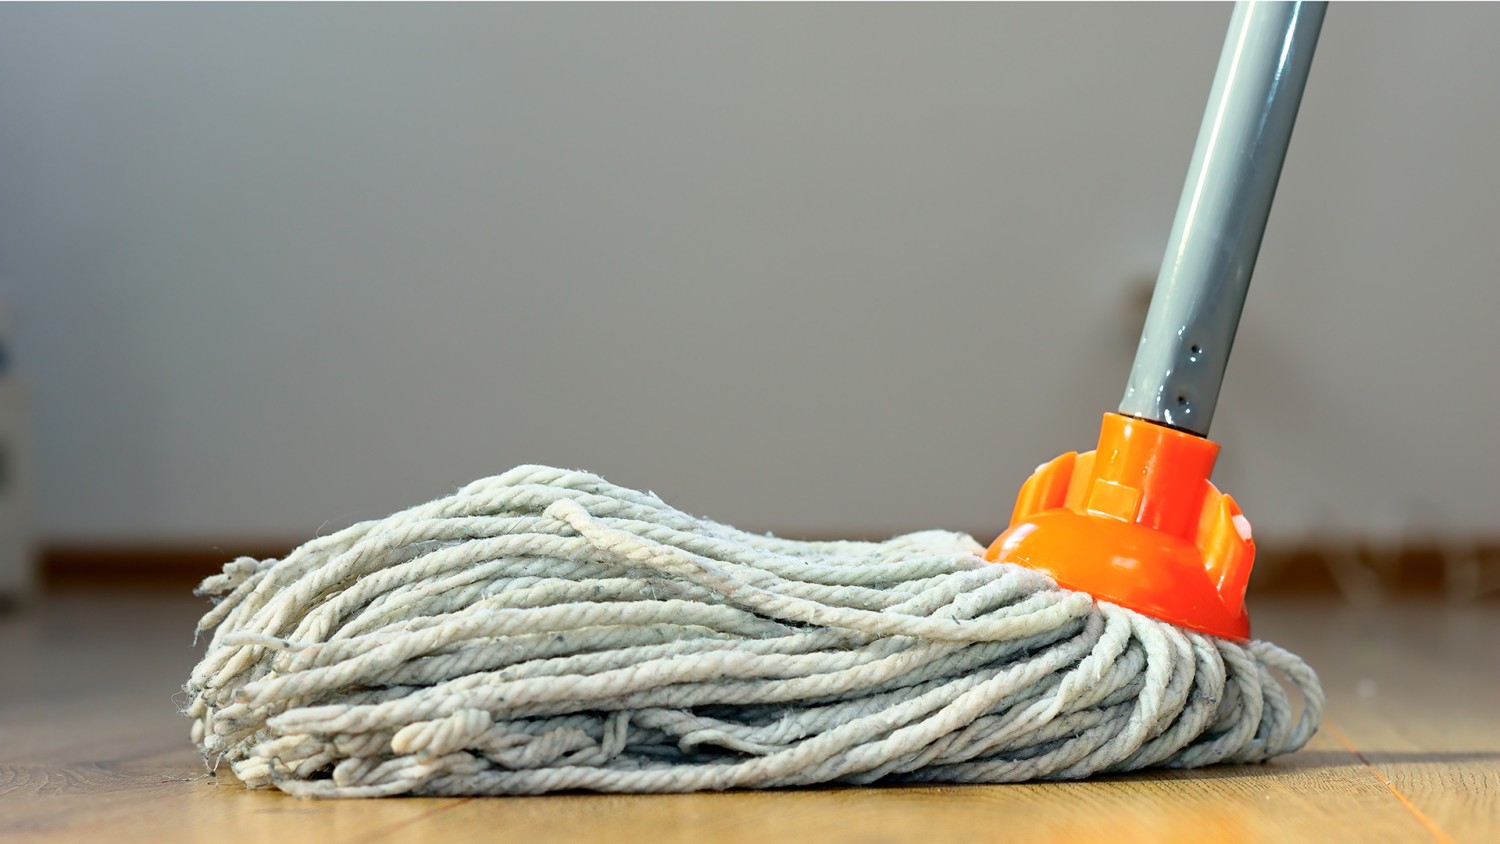 Dirty Mop: How to Clean a Mop Head